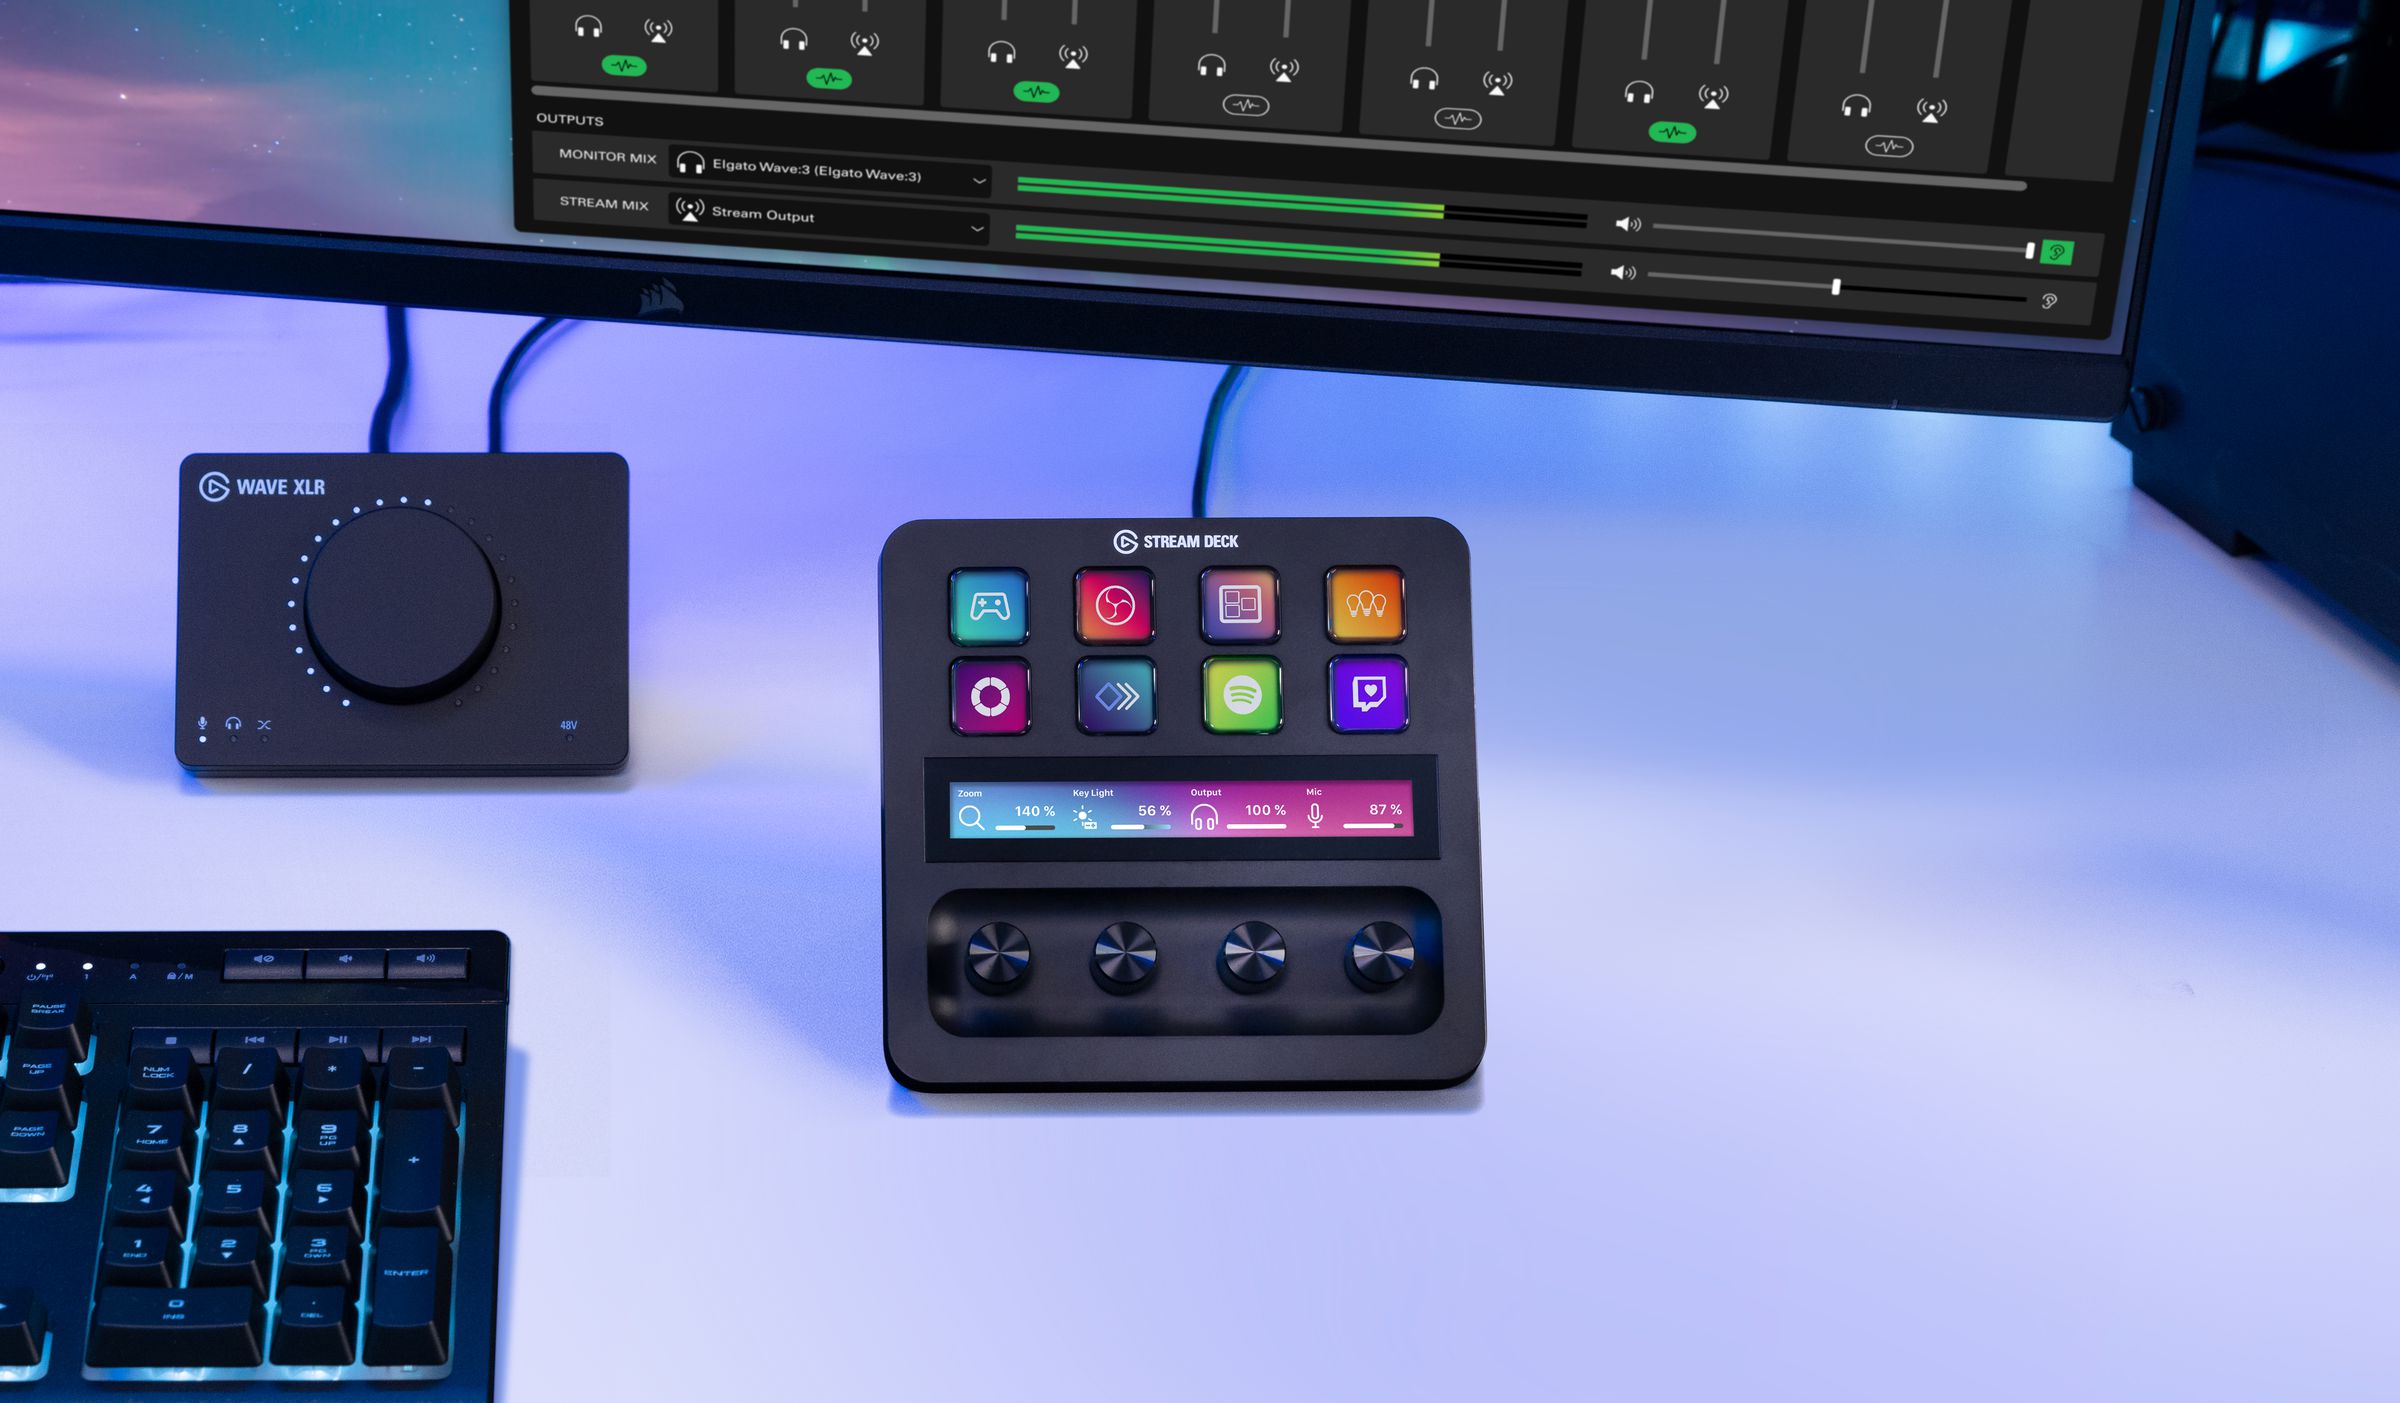 A stock photo of the Stream Deck Plus